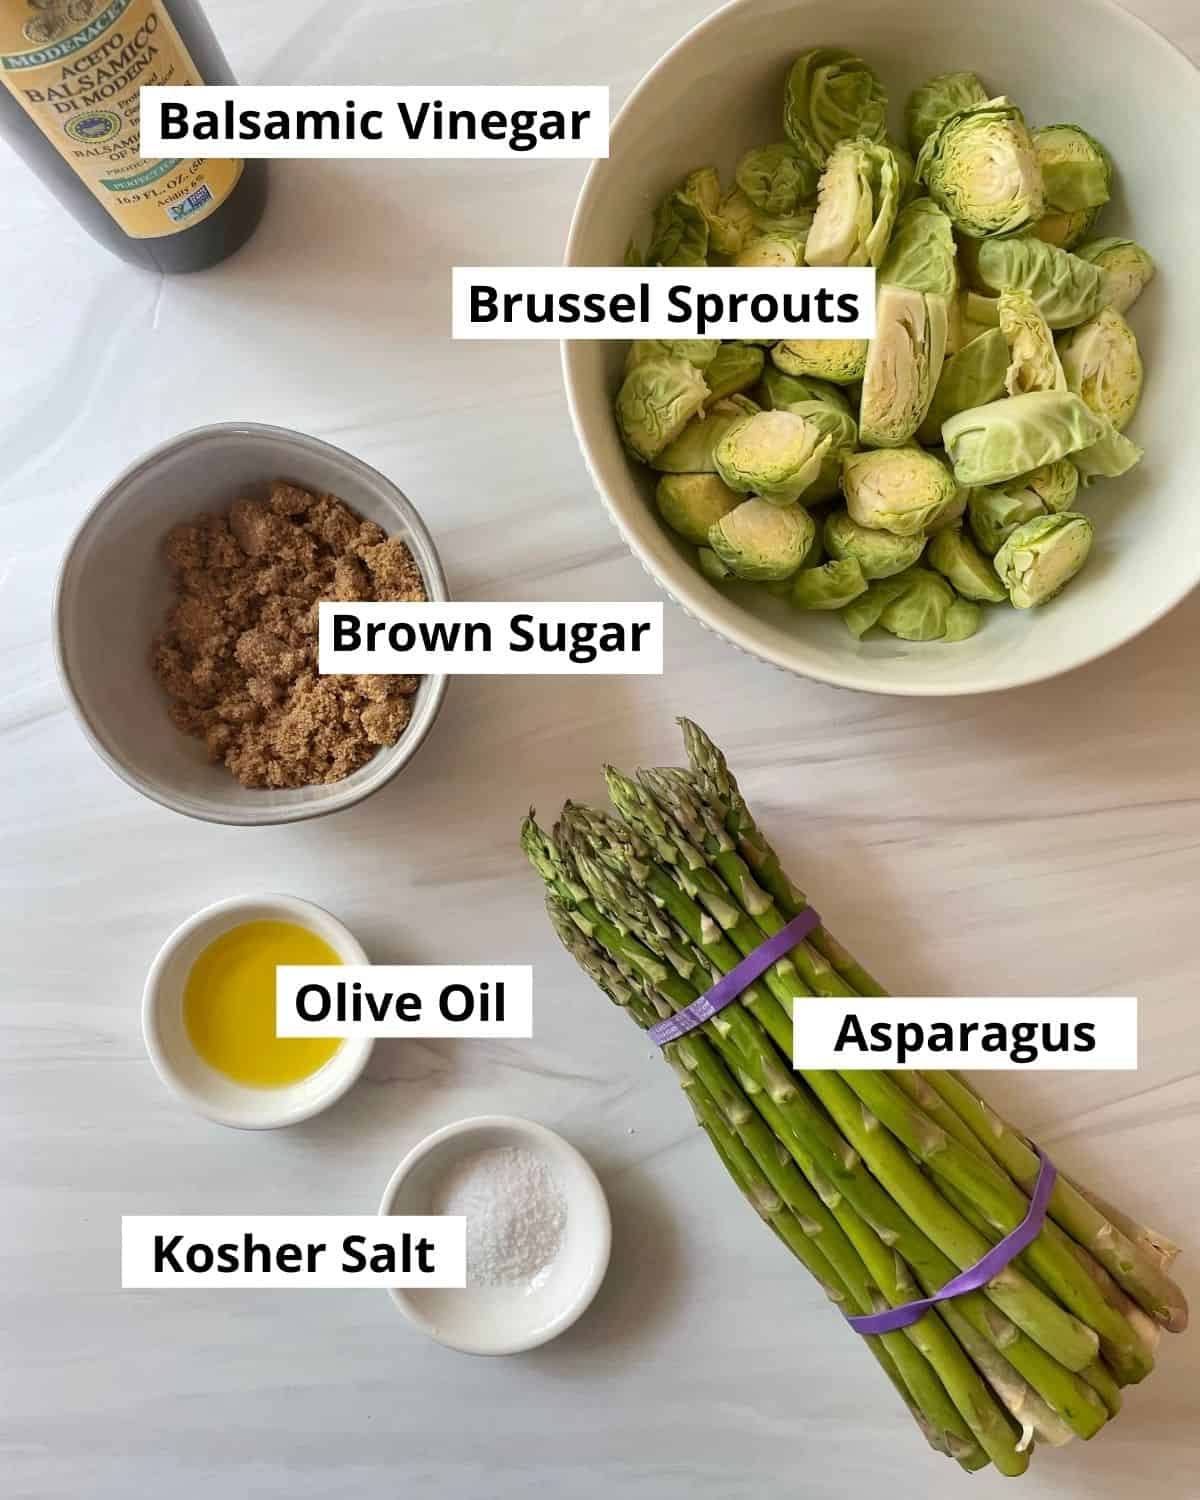 Roasted asparagus and brussel sprouts recipe ingredients.